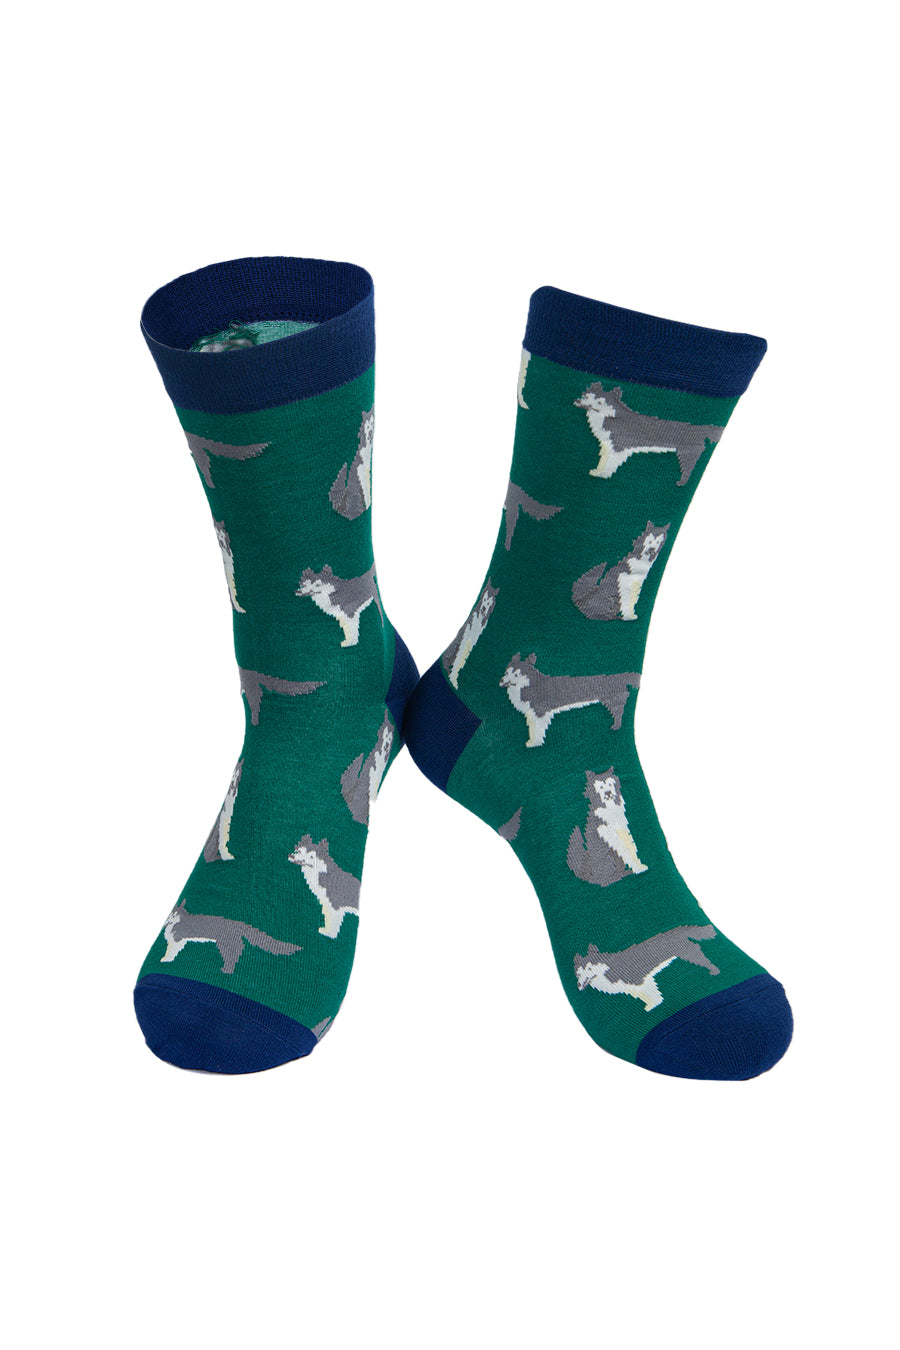 green socks with a yellow heel, toe and cuff with an all over pattern of husky dogs